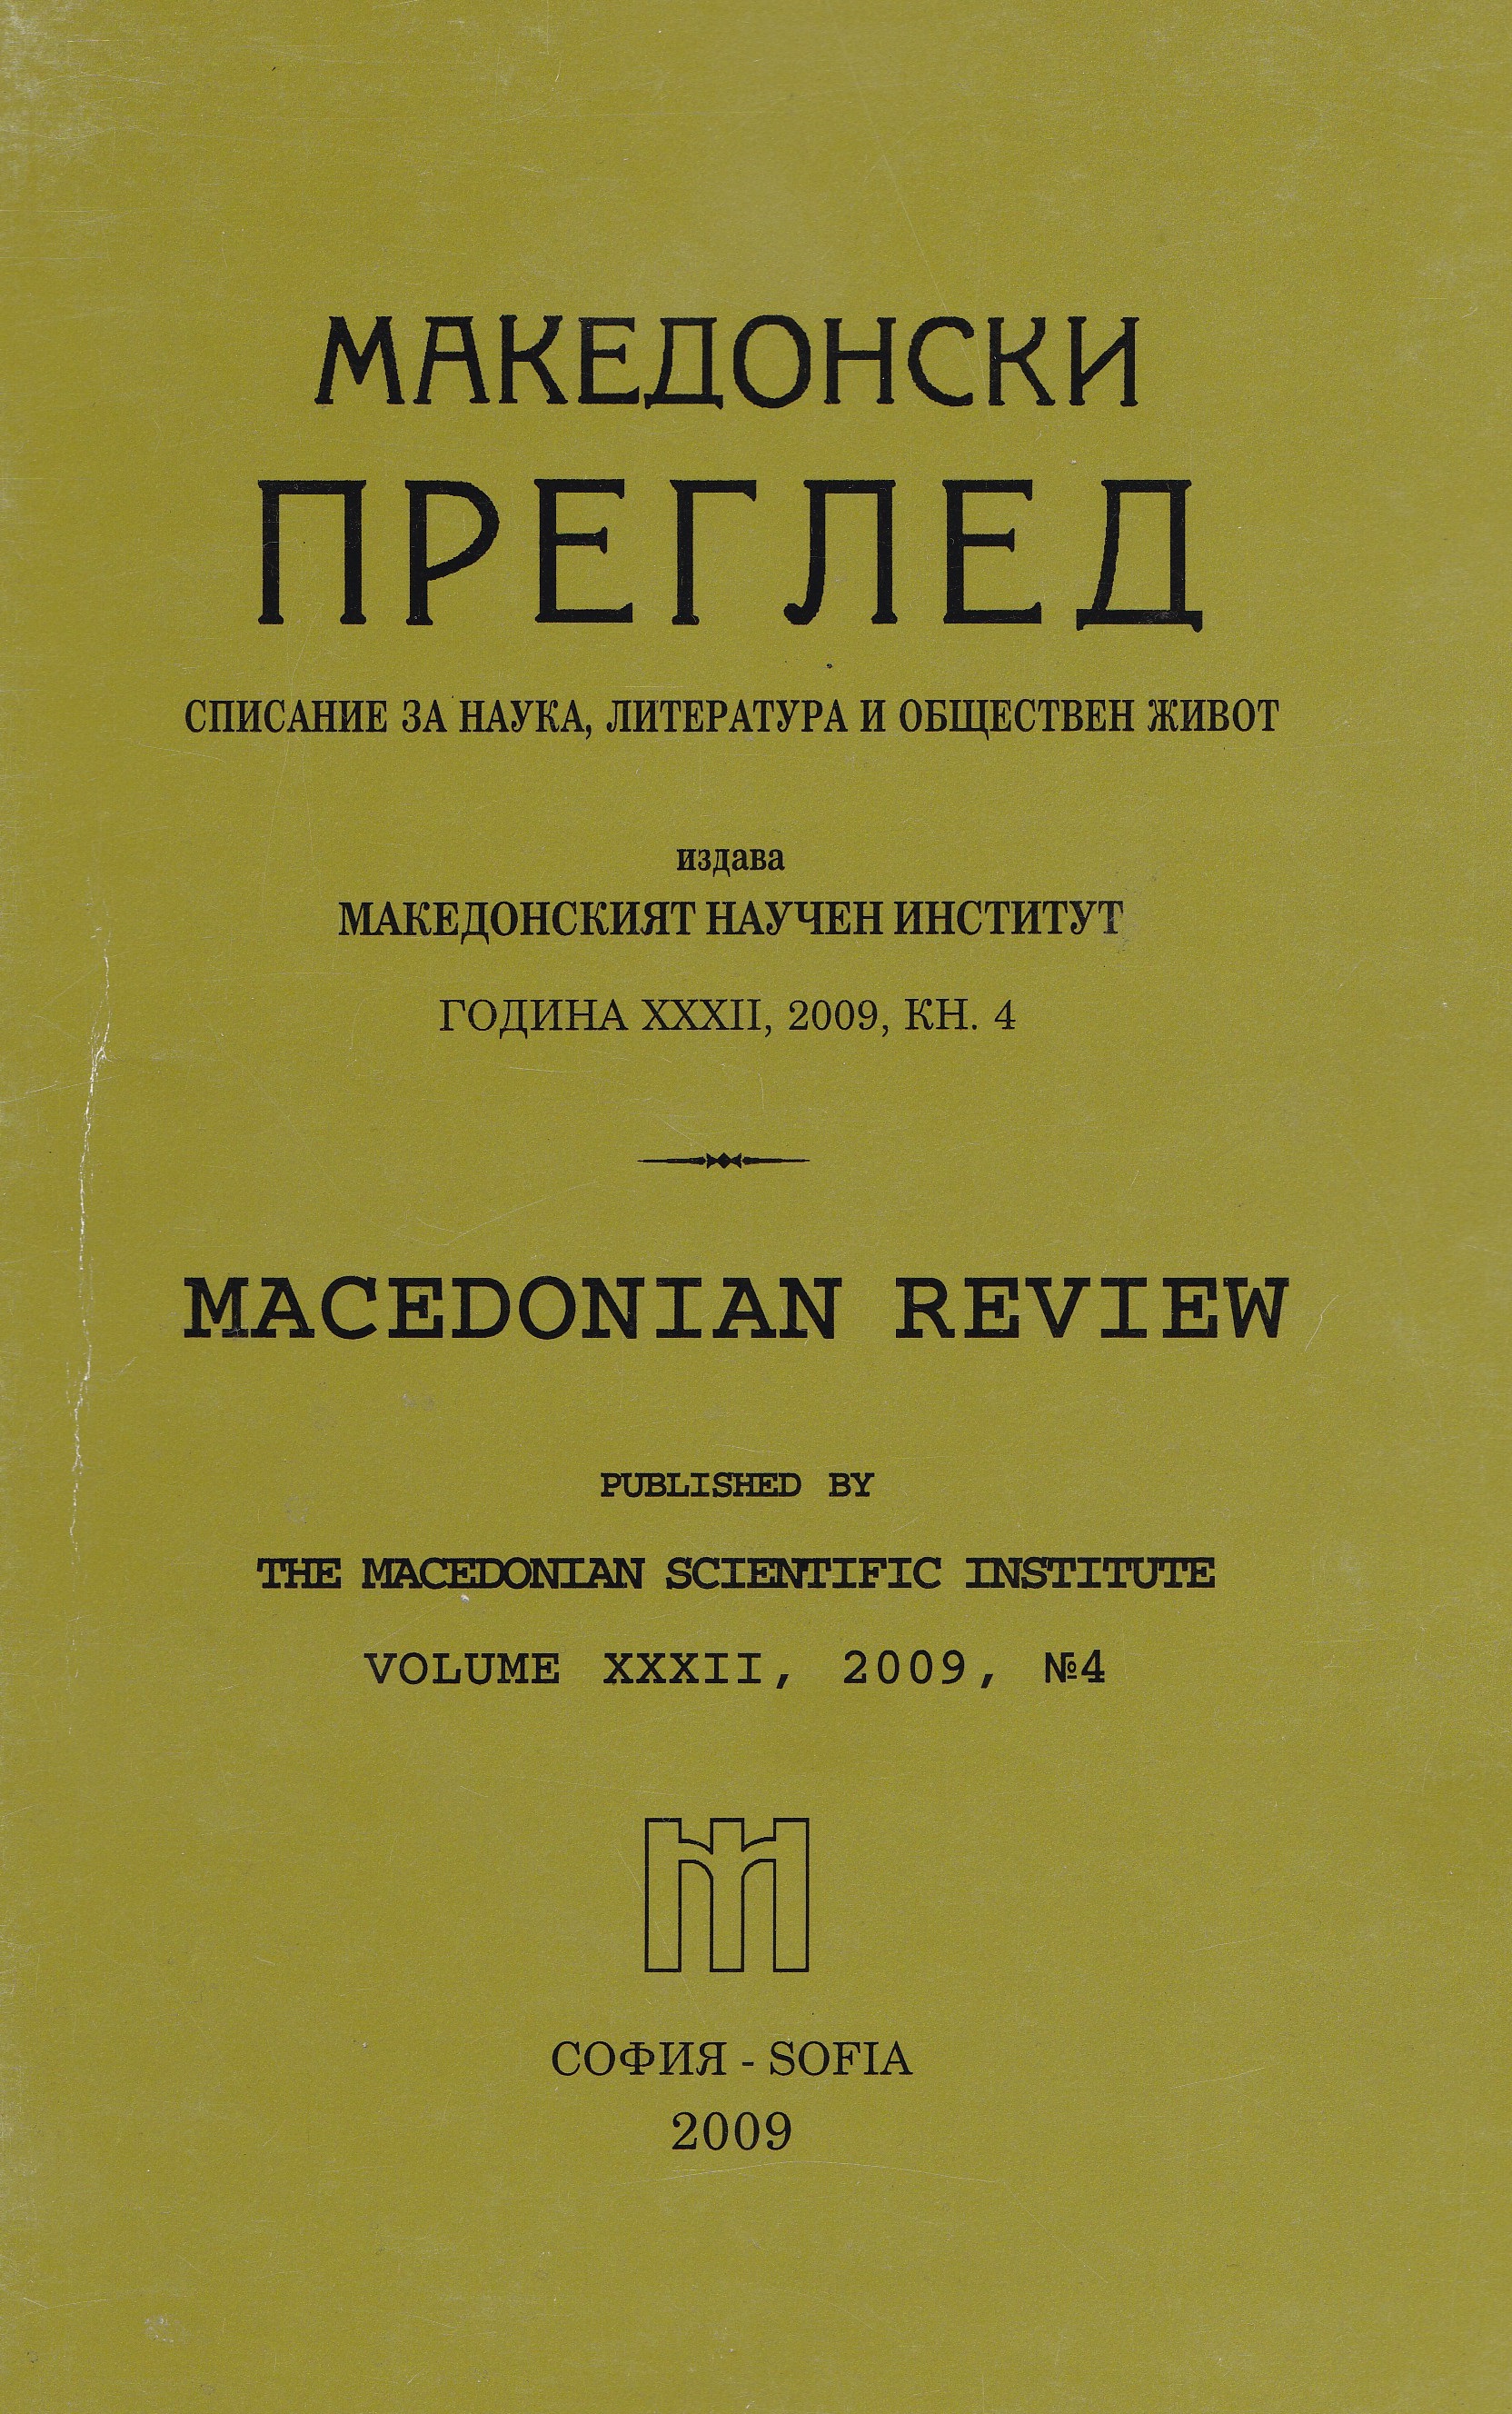 IMARO being financed by the Bulgarian governments after the Young Turk Revolution Cover Image